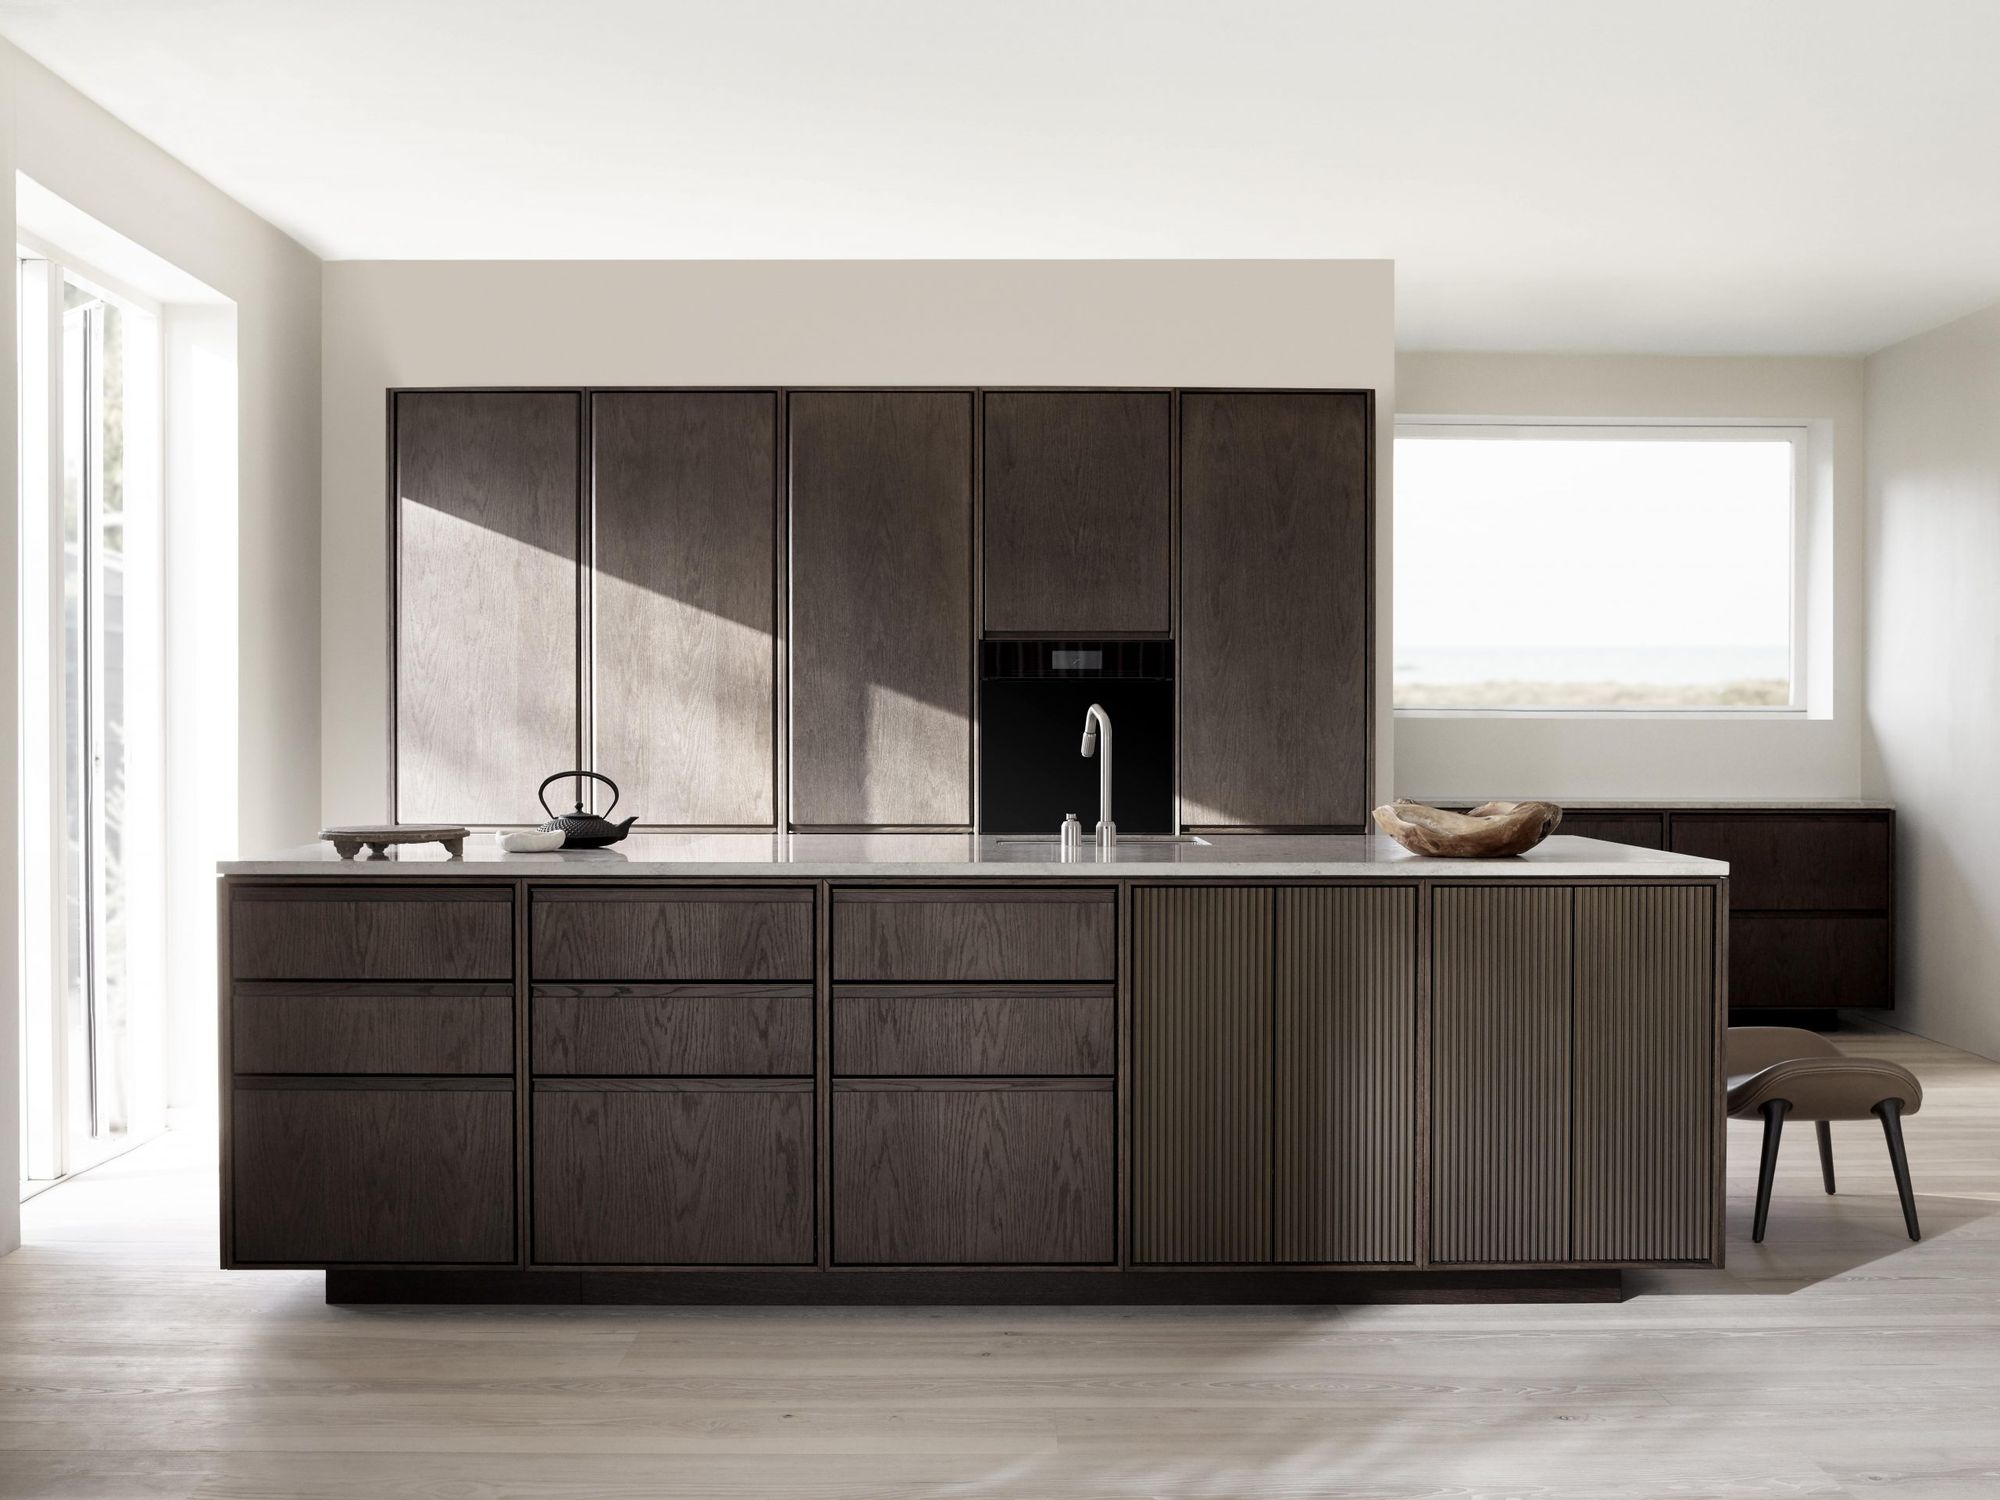 Vipp, the Danish brand that makes timeless kitchen furniture, has arrived to Hungary